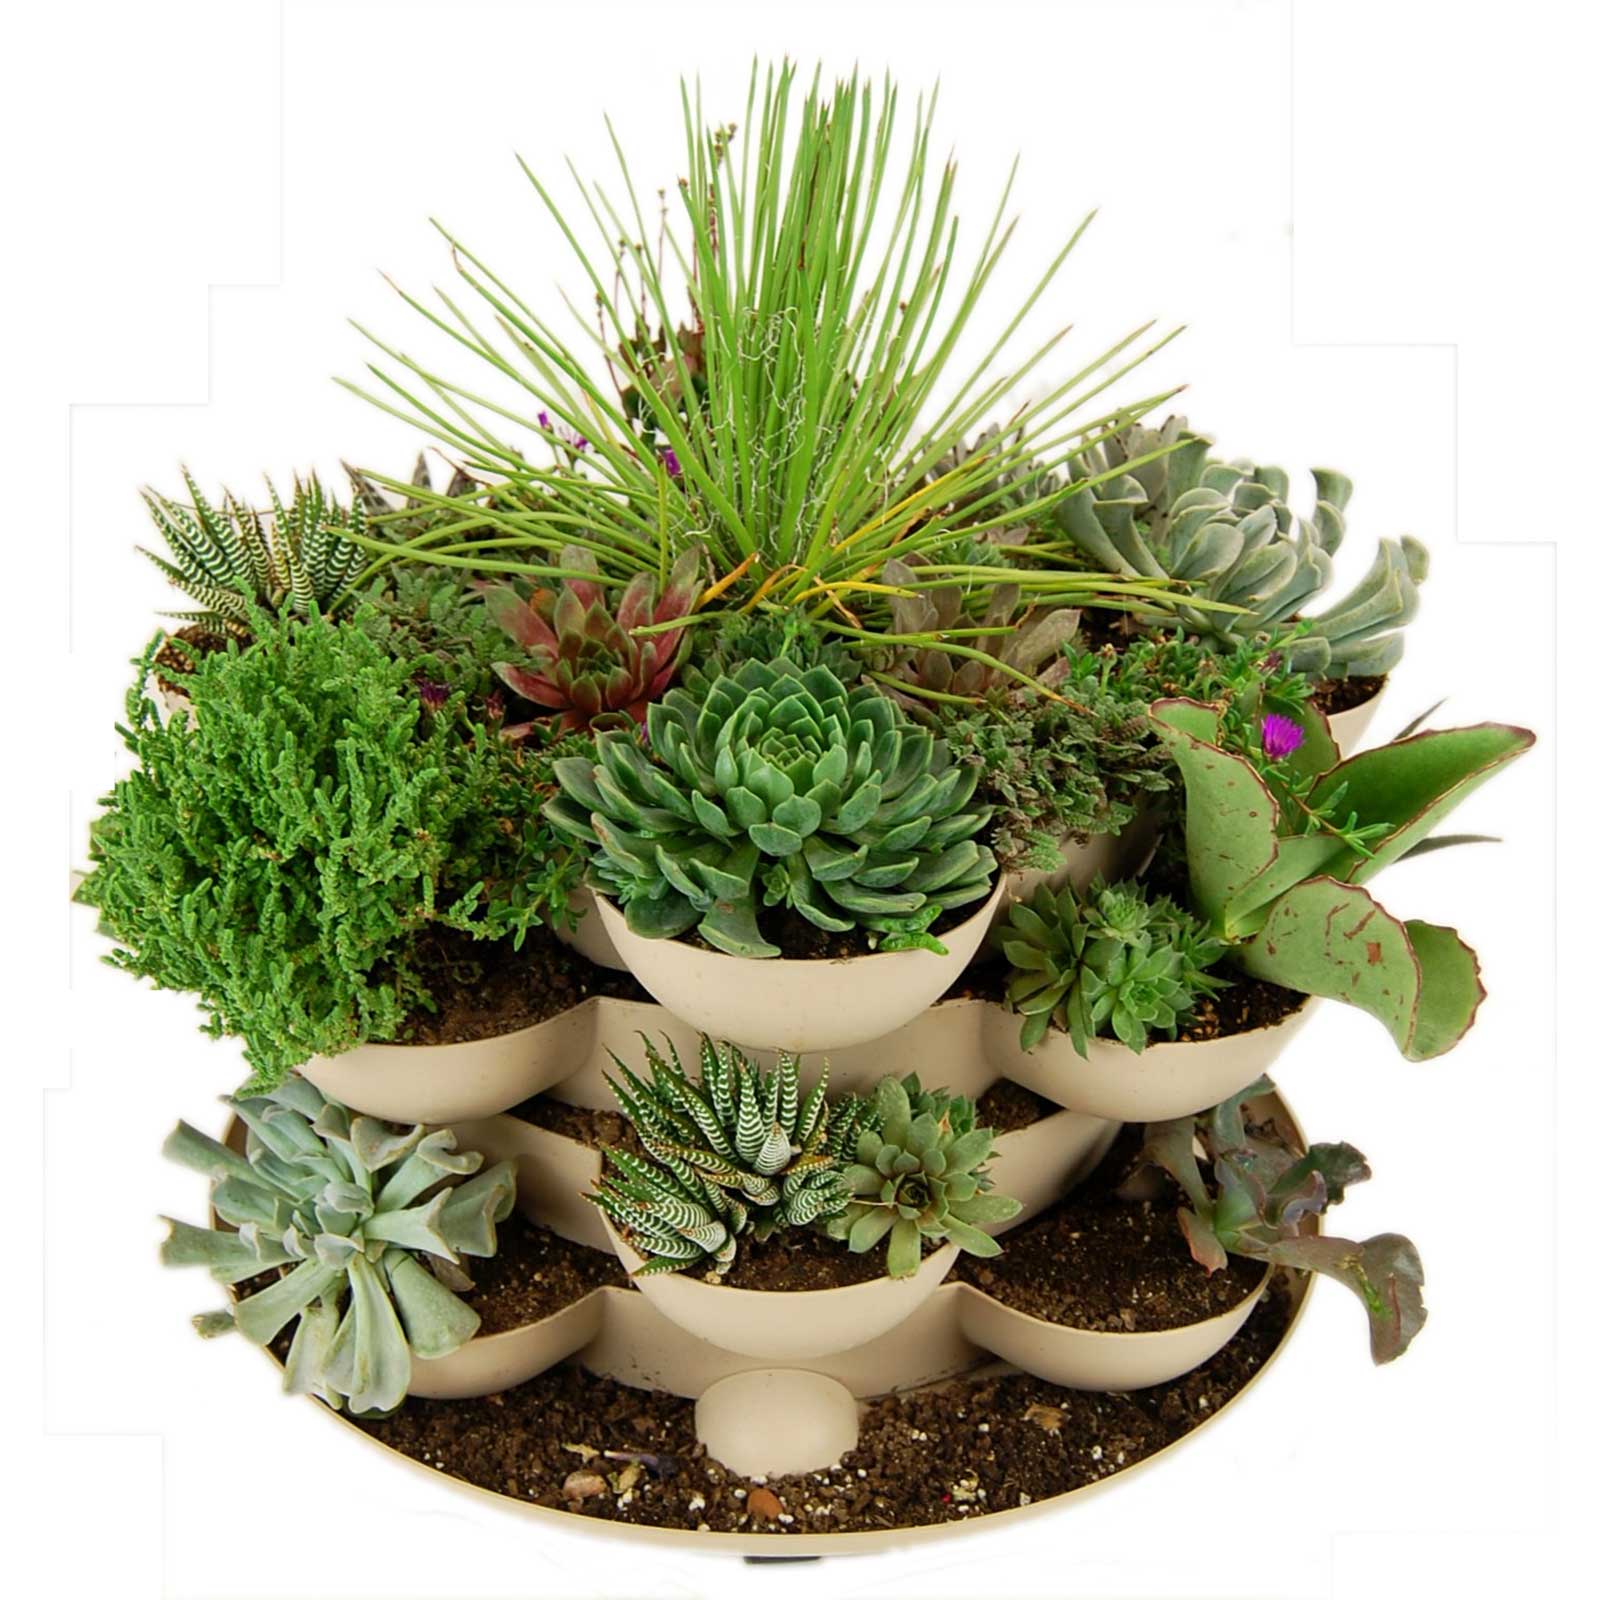 https://cdn.shopify.com/s/files/1/2016/2681/products/stack-and-grow-grown-cacti.jpg?v=1607374680